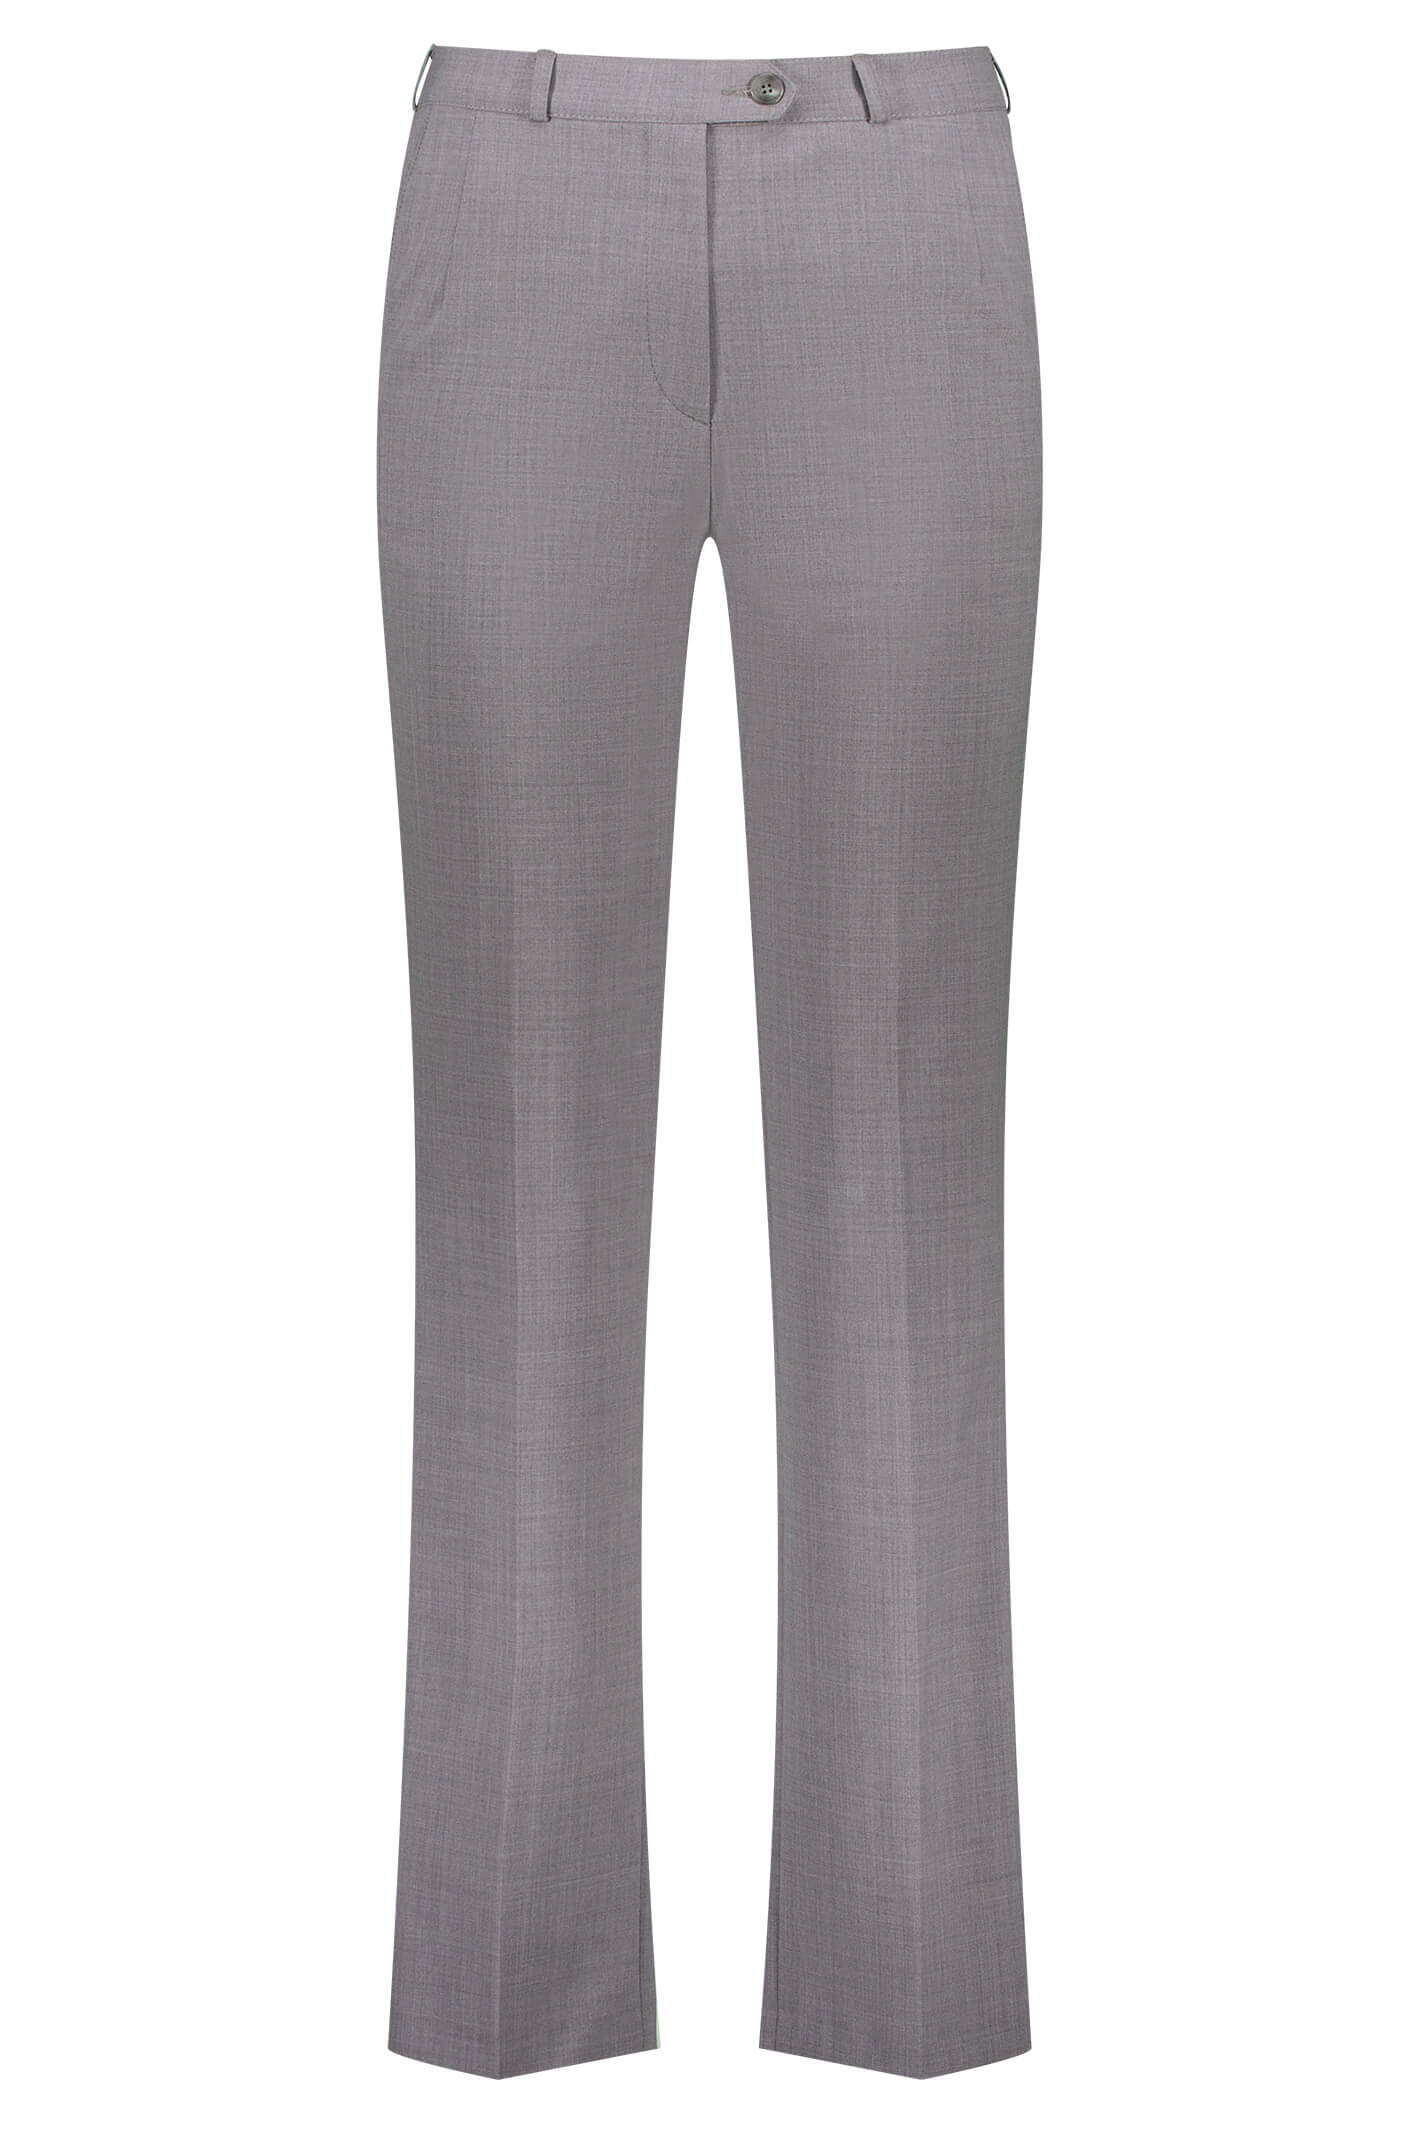 Women's Grey Trousers Tunic Bottoms: Buy Business Wear, Corporate Clothing  and Staff Uniforms.